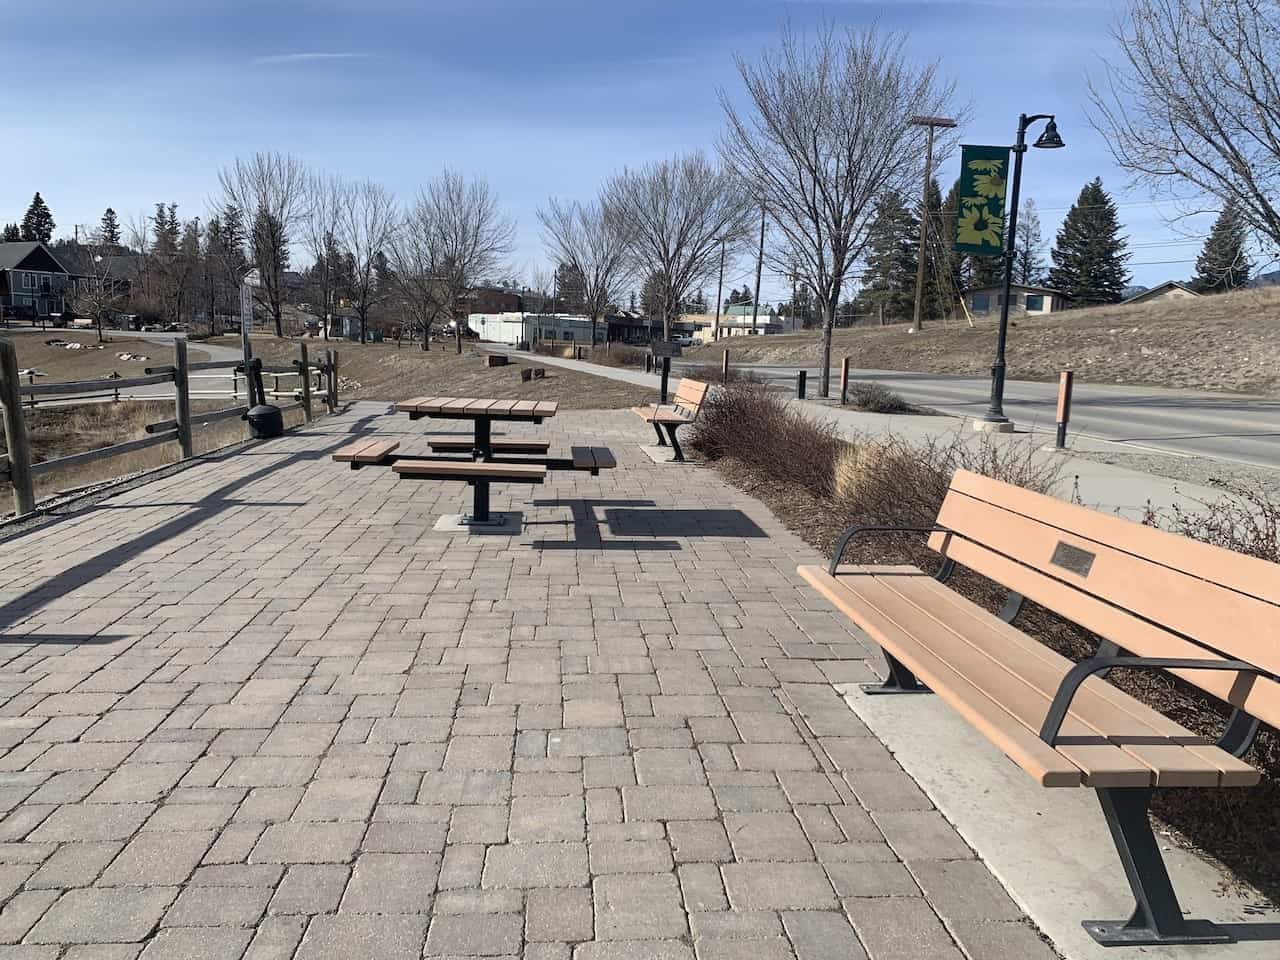 Picnic Tables and Seating at Pothole Park  - Along the walkway, visitors have access to ample seating choices at Pothole Park in Invermere, British Columbia.